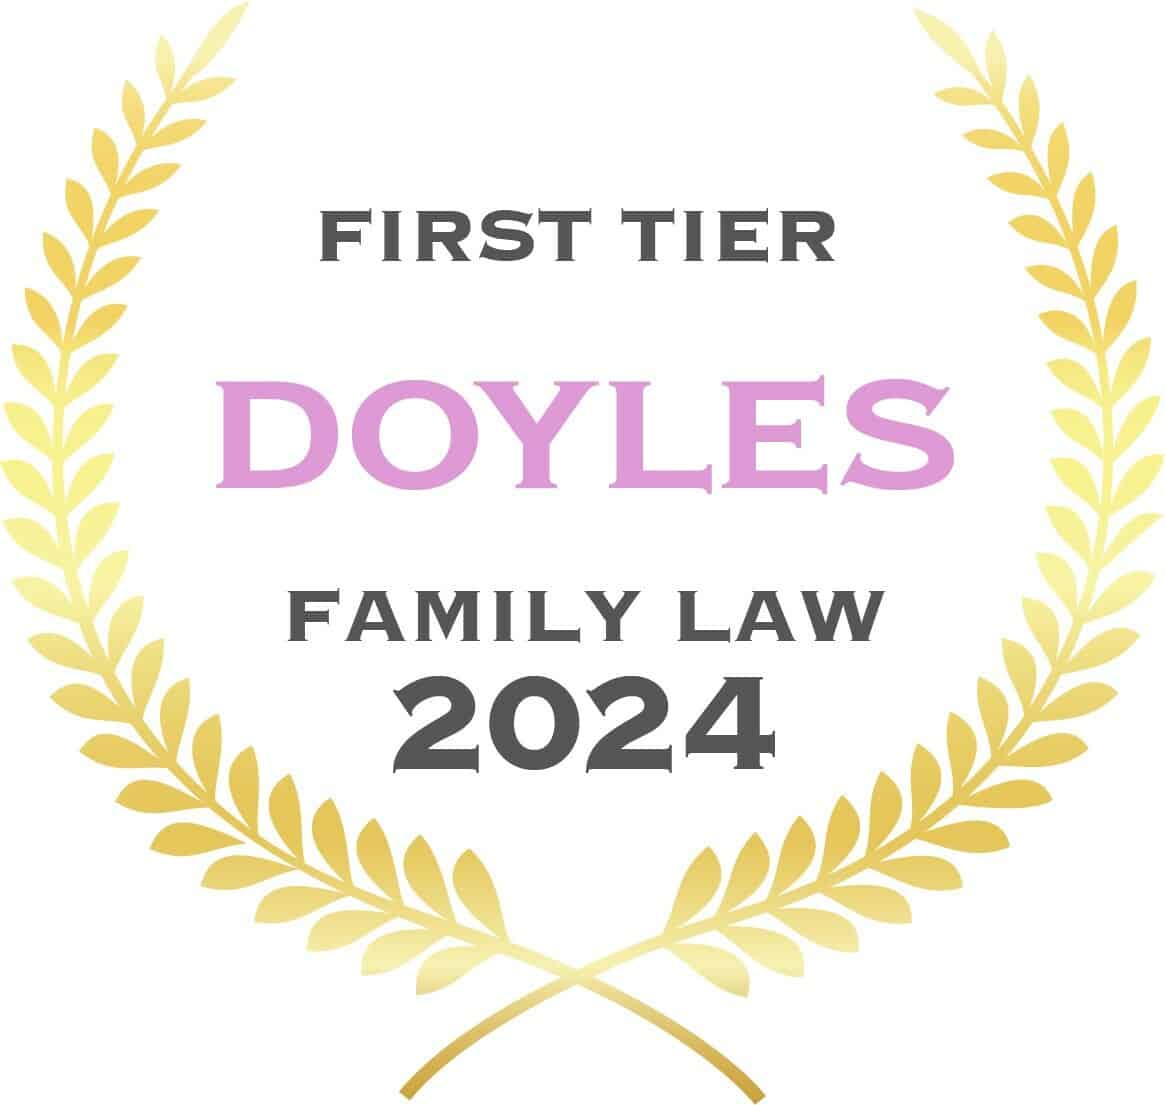 Doyles Guide: First Tier Family Law 2024 award